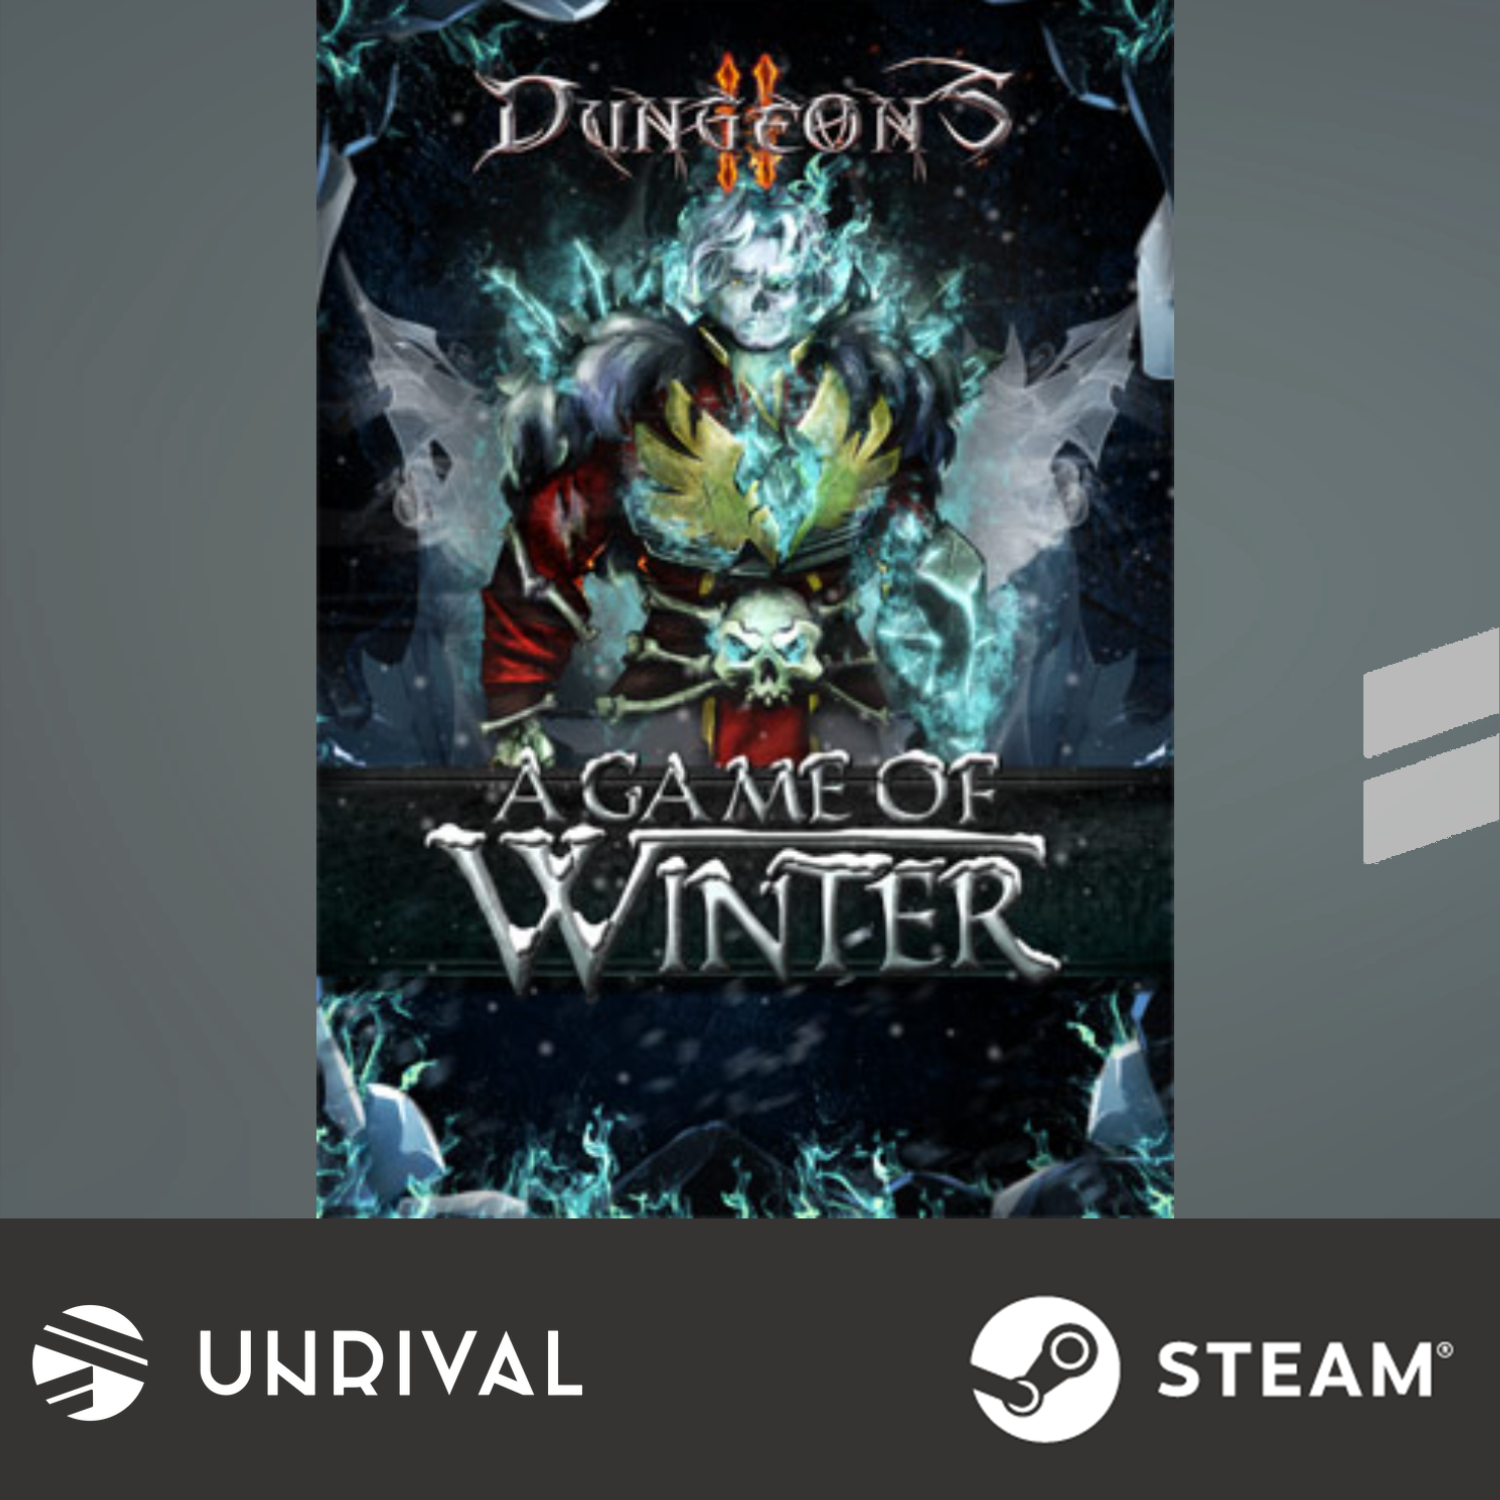 [Hot Sale] Dungeons 2 - A Game of Winter PC Digital Download Game - Unrival